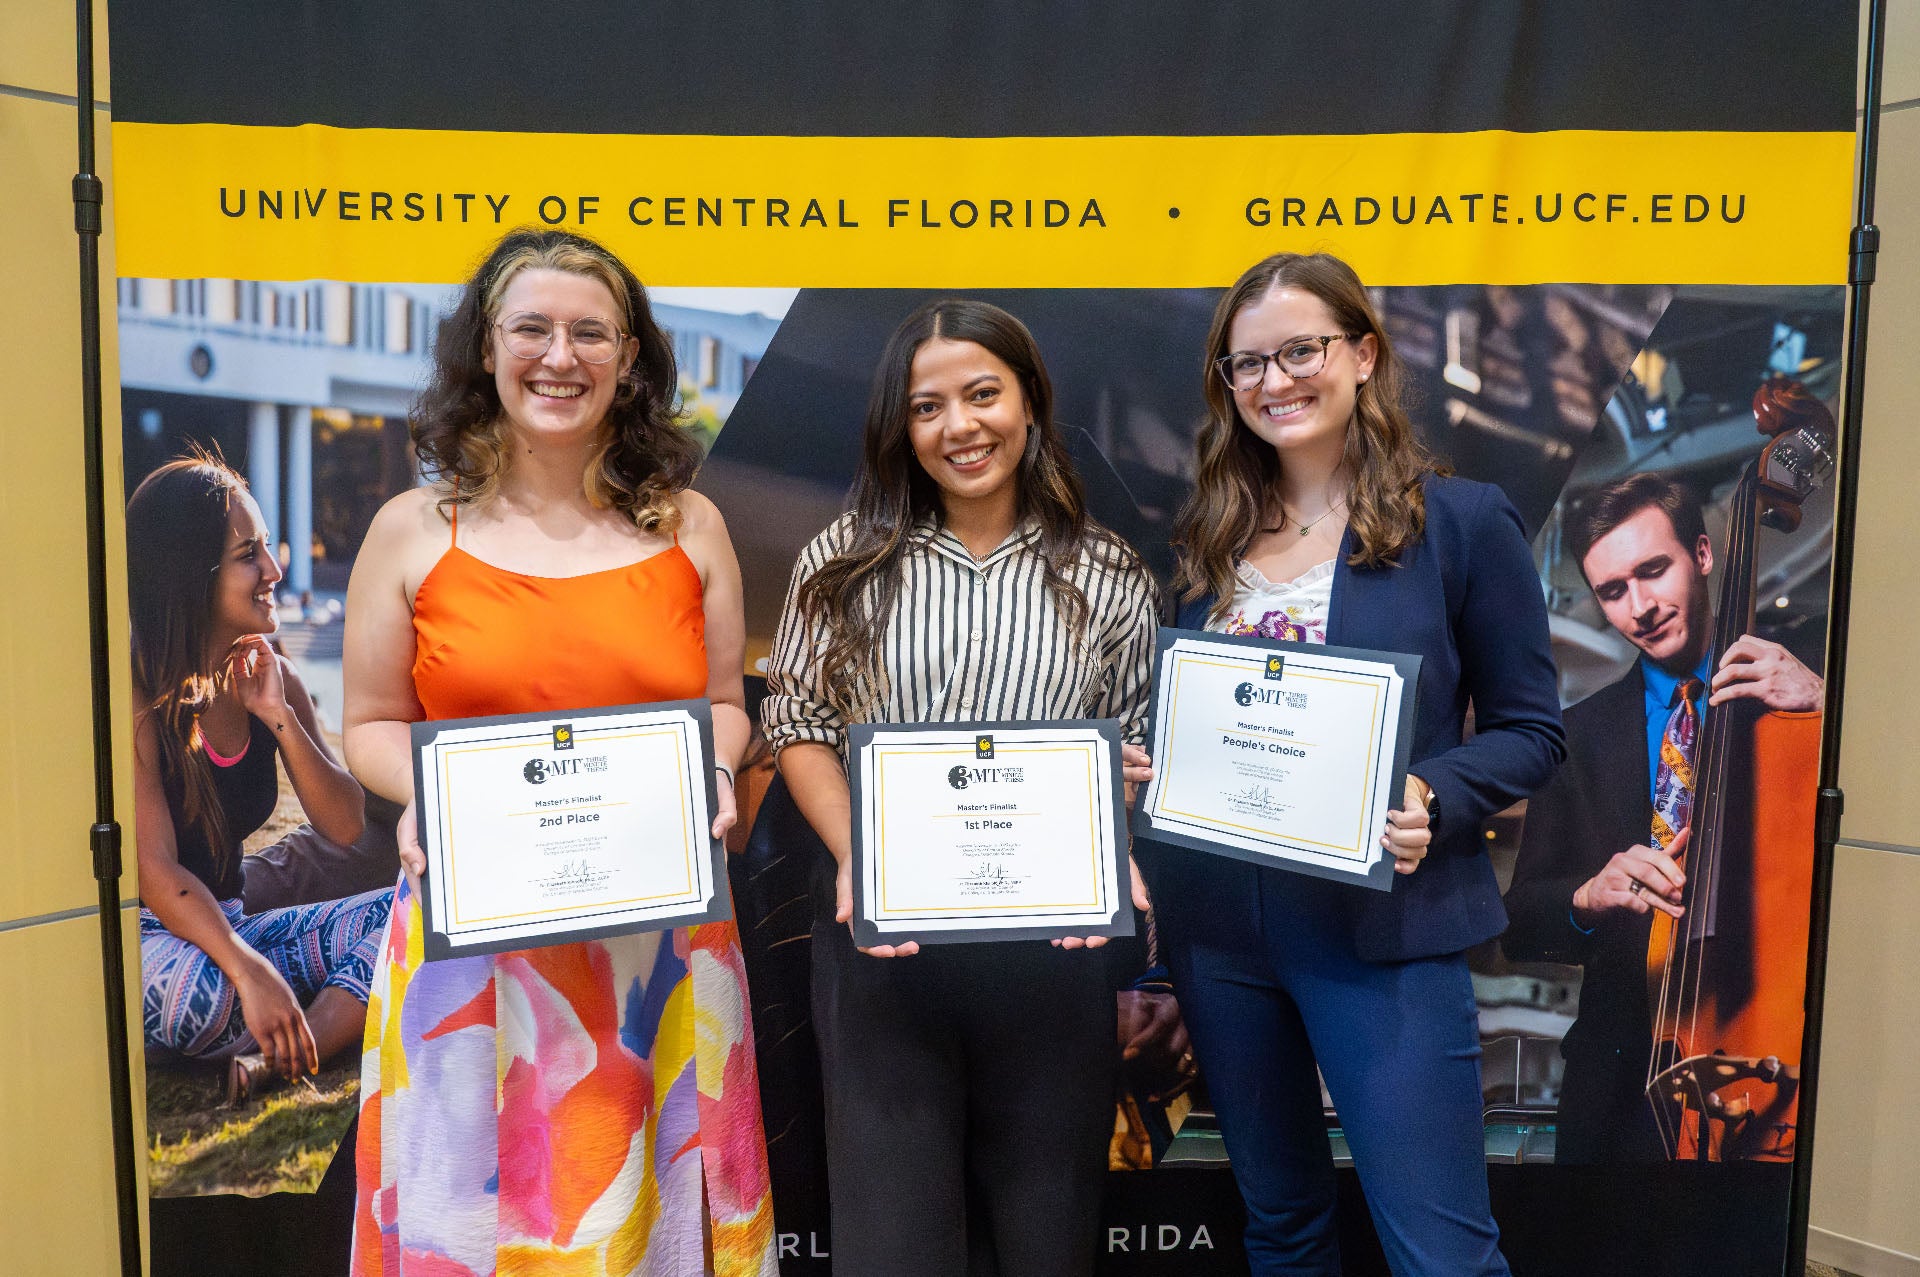 winners of master's 3mt (left to right) Cory Kennedy Barrow (2nd Place), Melanie Cedeno Lopez (First Place), and Meghan Kane (People's Choice)